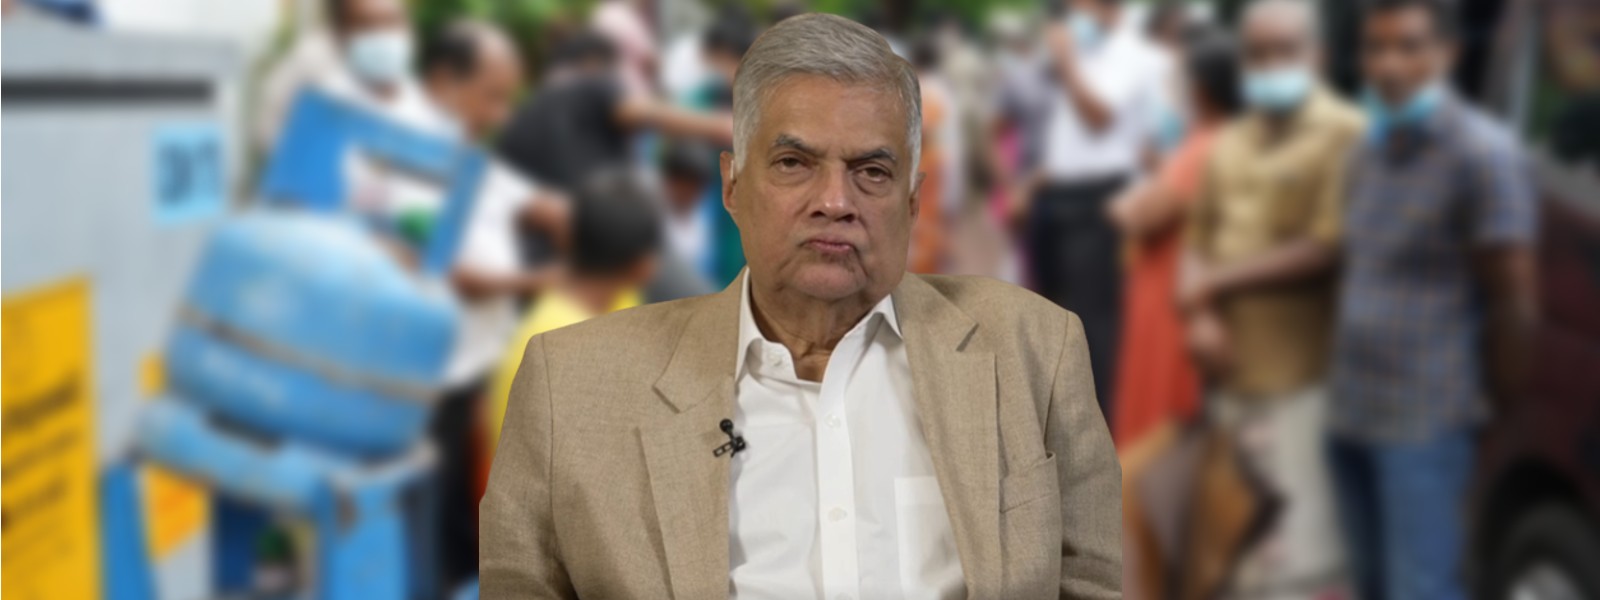 The food crisis is man made, Ranil tells Global Forum